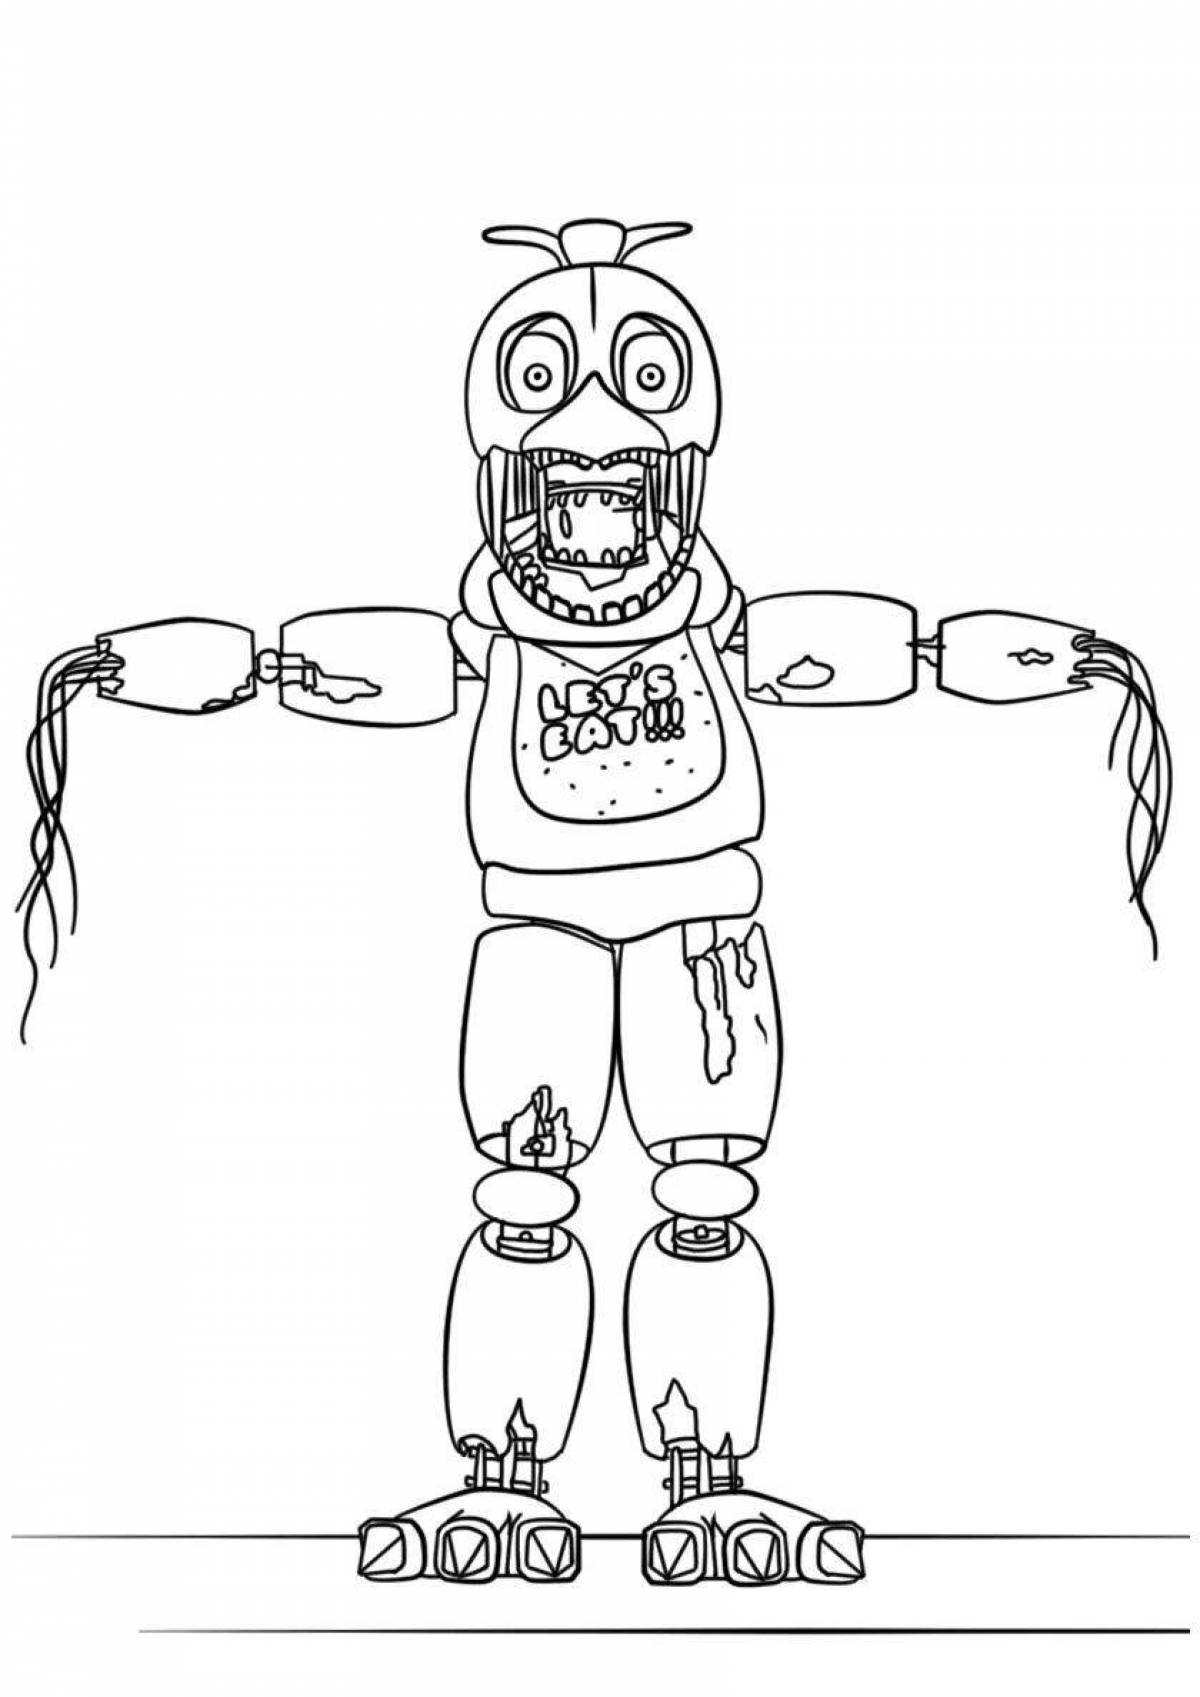 Coloring page special chick from fnaf 1